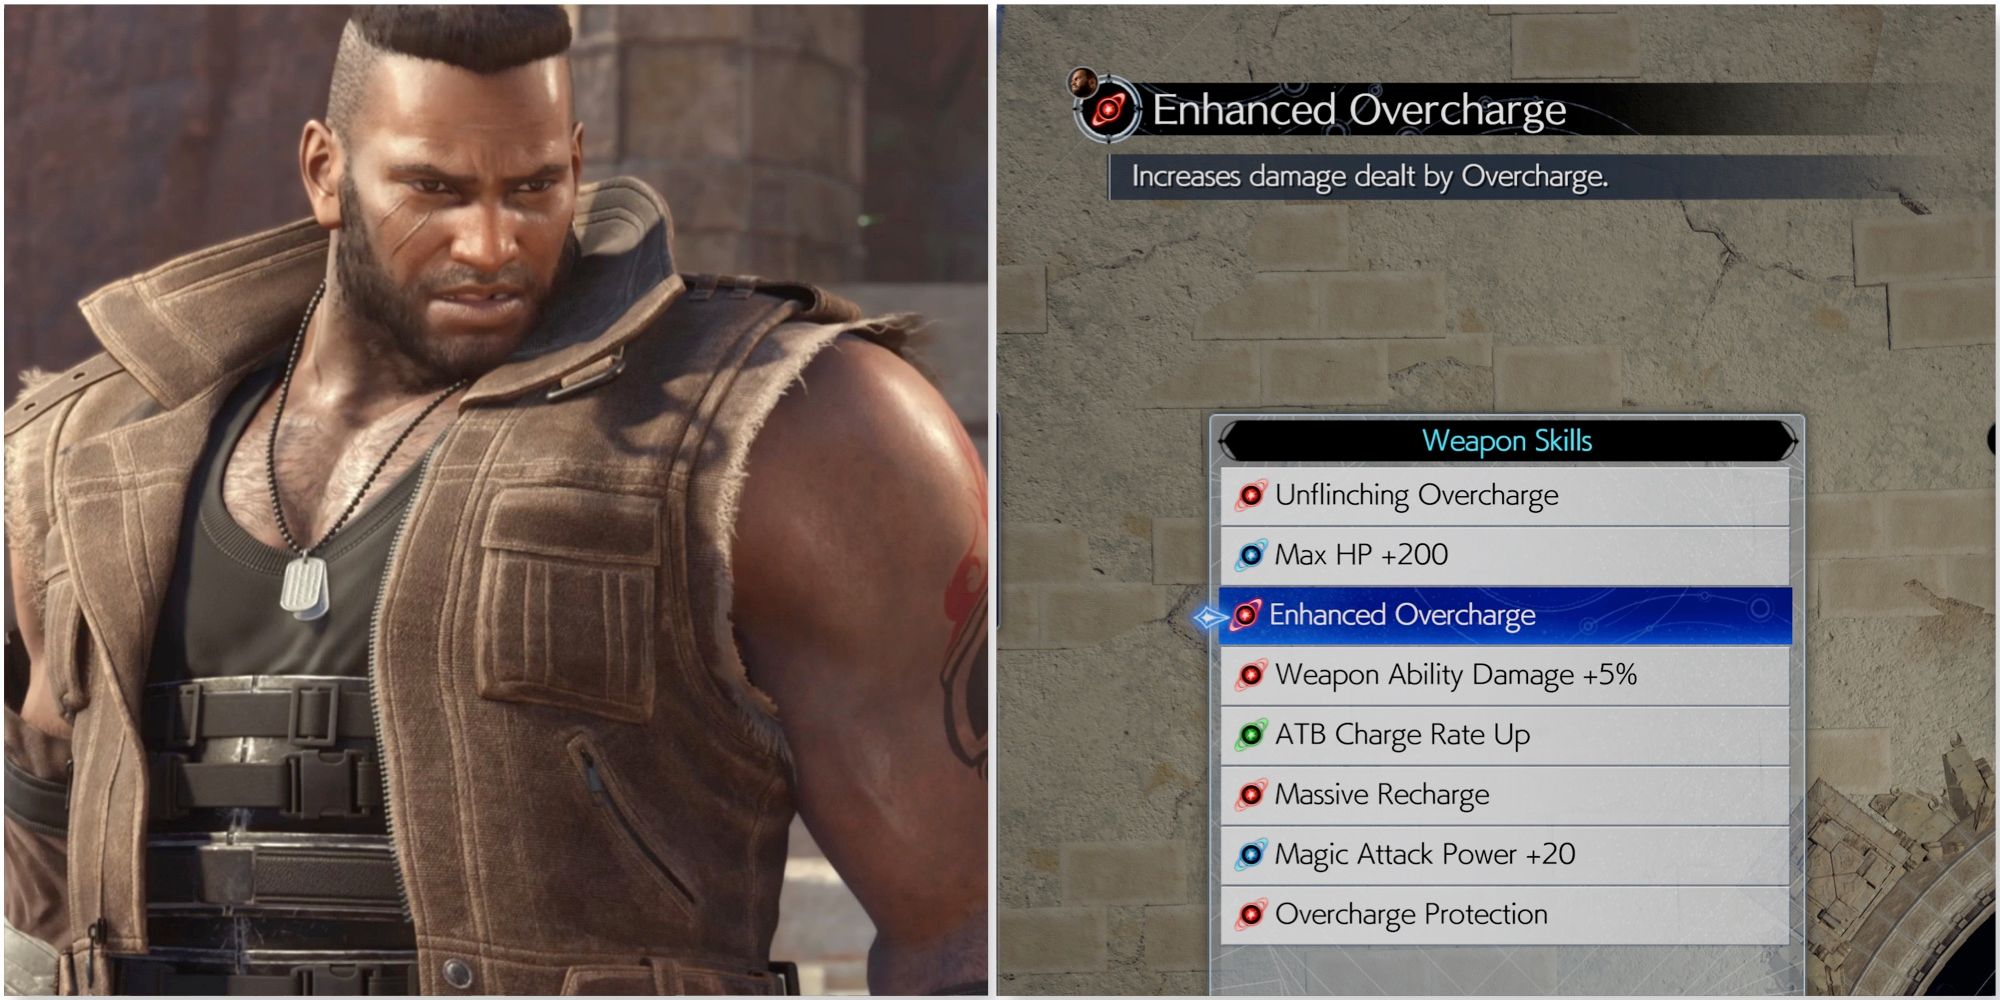 Barret and Enhanced Overcharge Barret weapon skill in Final Fantasy 7 Rebirth